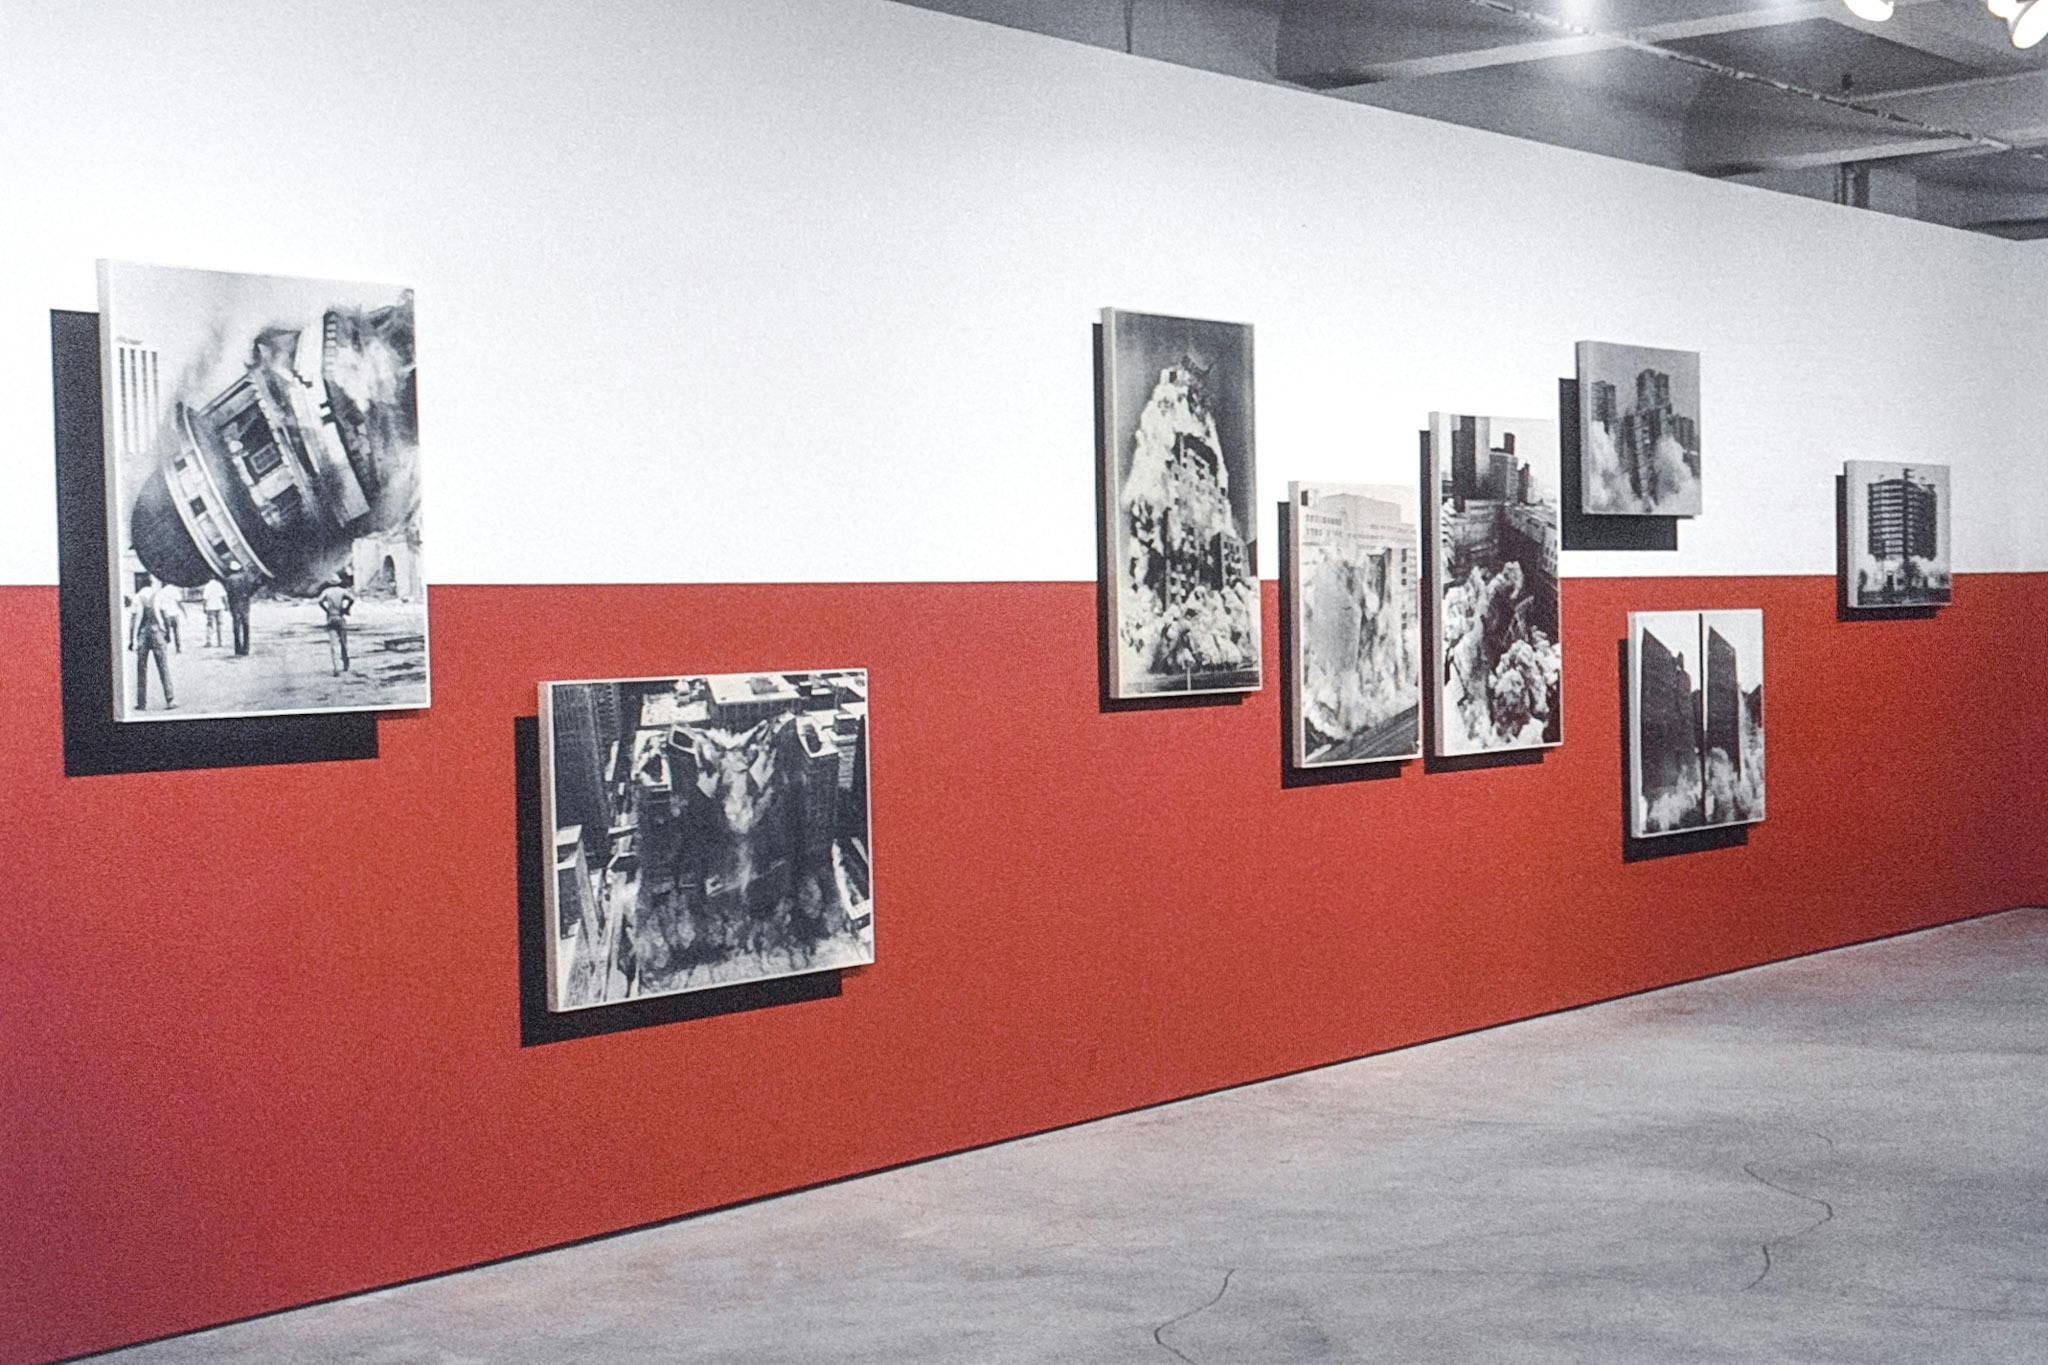 Eight large artworks on a white and red wall. The works are large black and white photos of buildings collapsing. The works are mounted slightly away from the wall, creating dramatic shadows. 